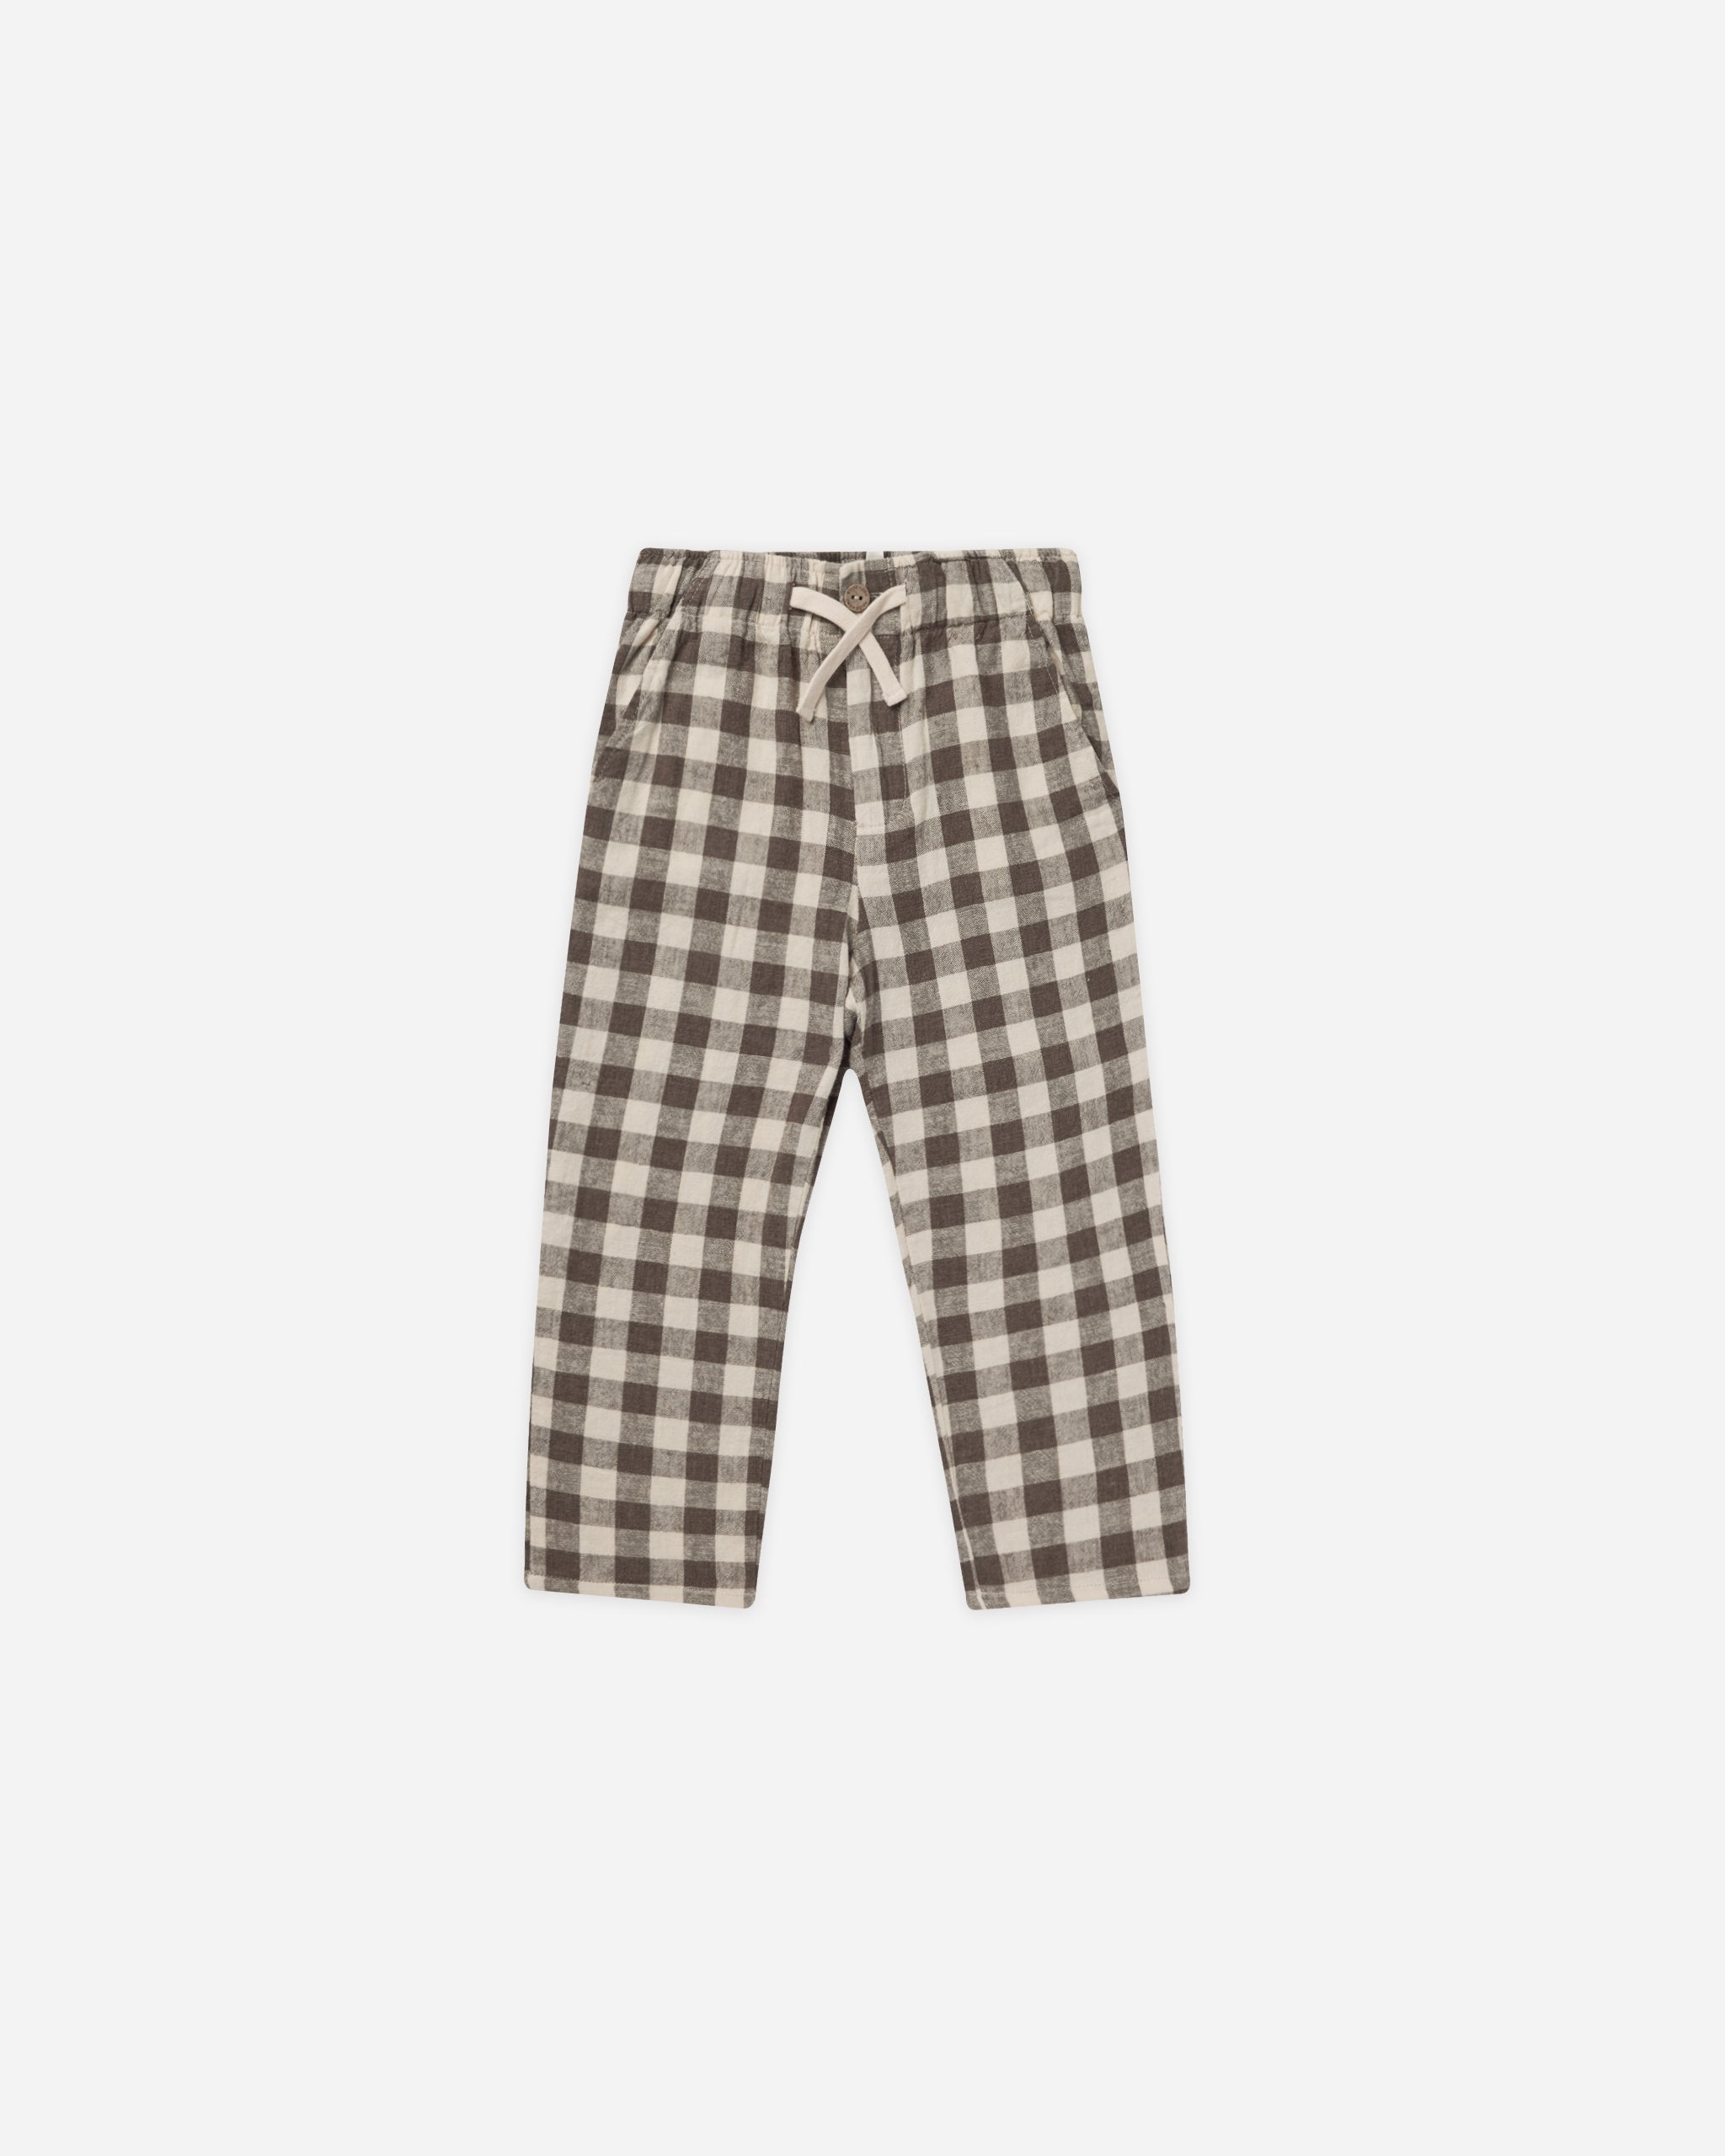 Kalen Pant || Charcoal Check - Rylee + Cru | Kids Clothes | Trendy Baby Clothes | Modern Infant Outfits |